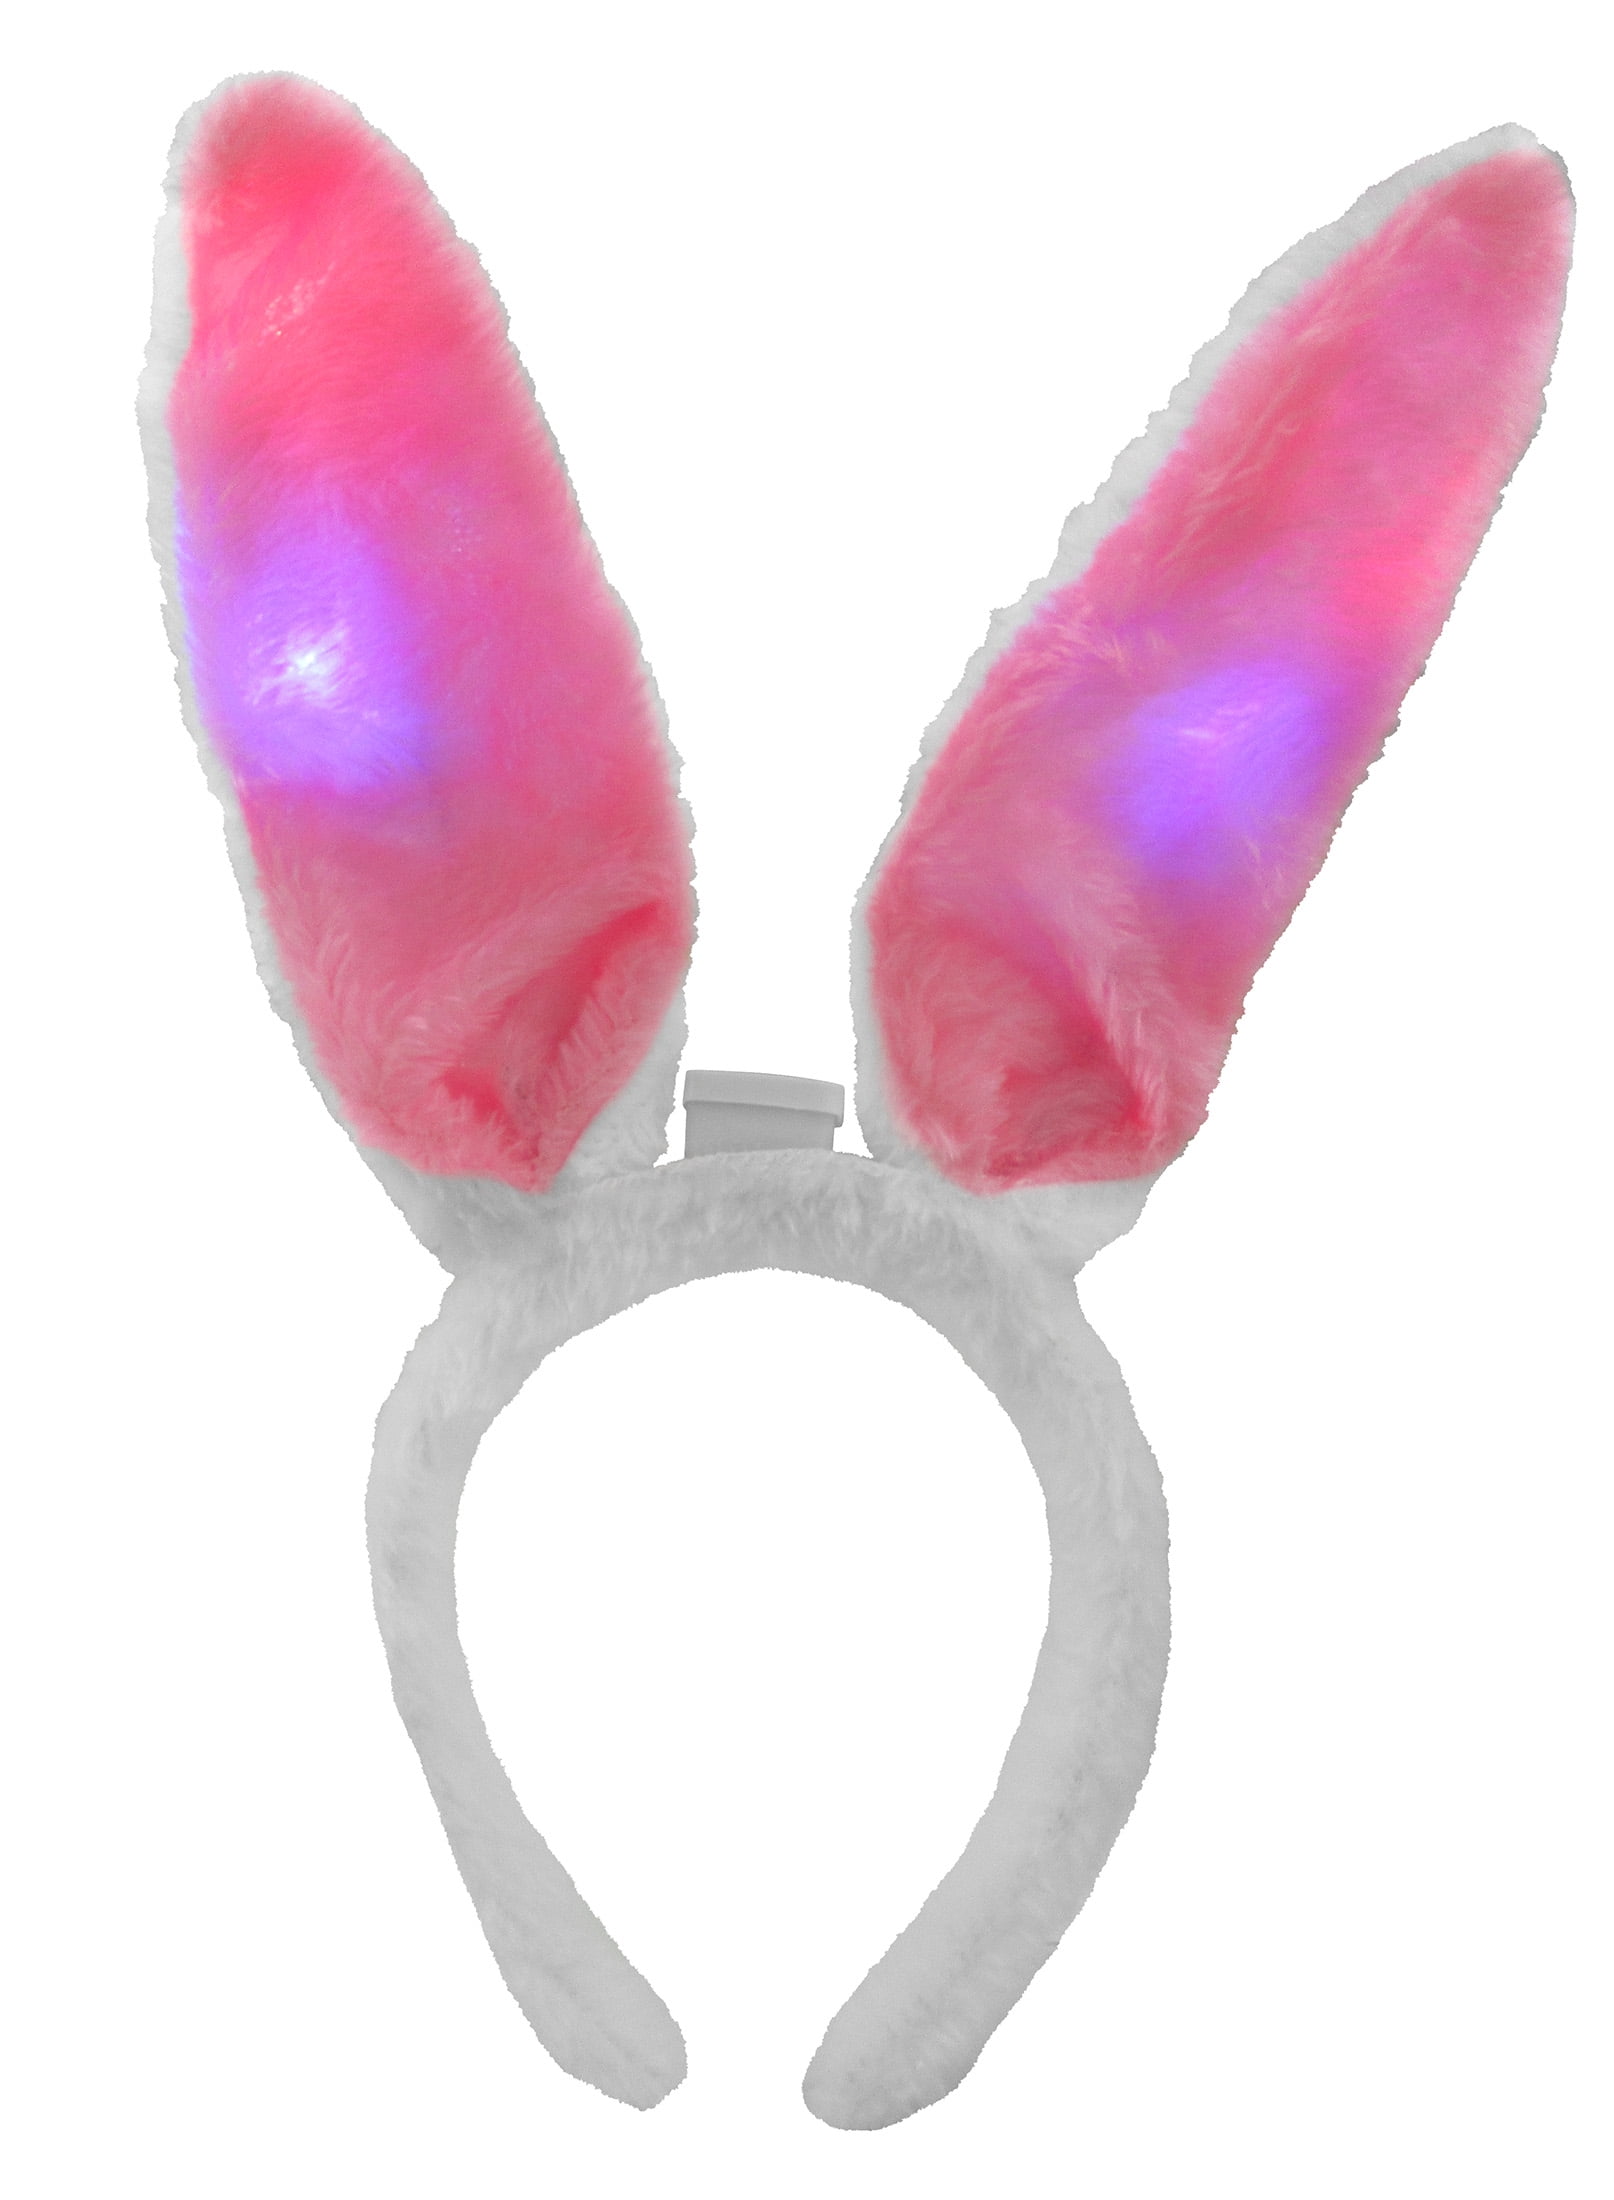 grey and white colors great for costume or Easter egg hunts Satin Bunny Ears Easter Headband set 3 pk pink